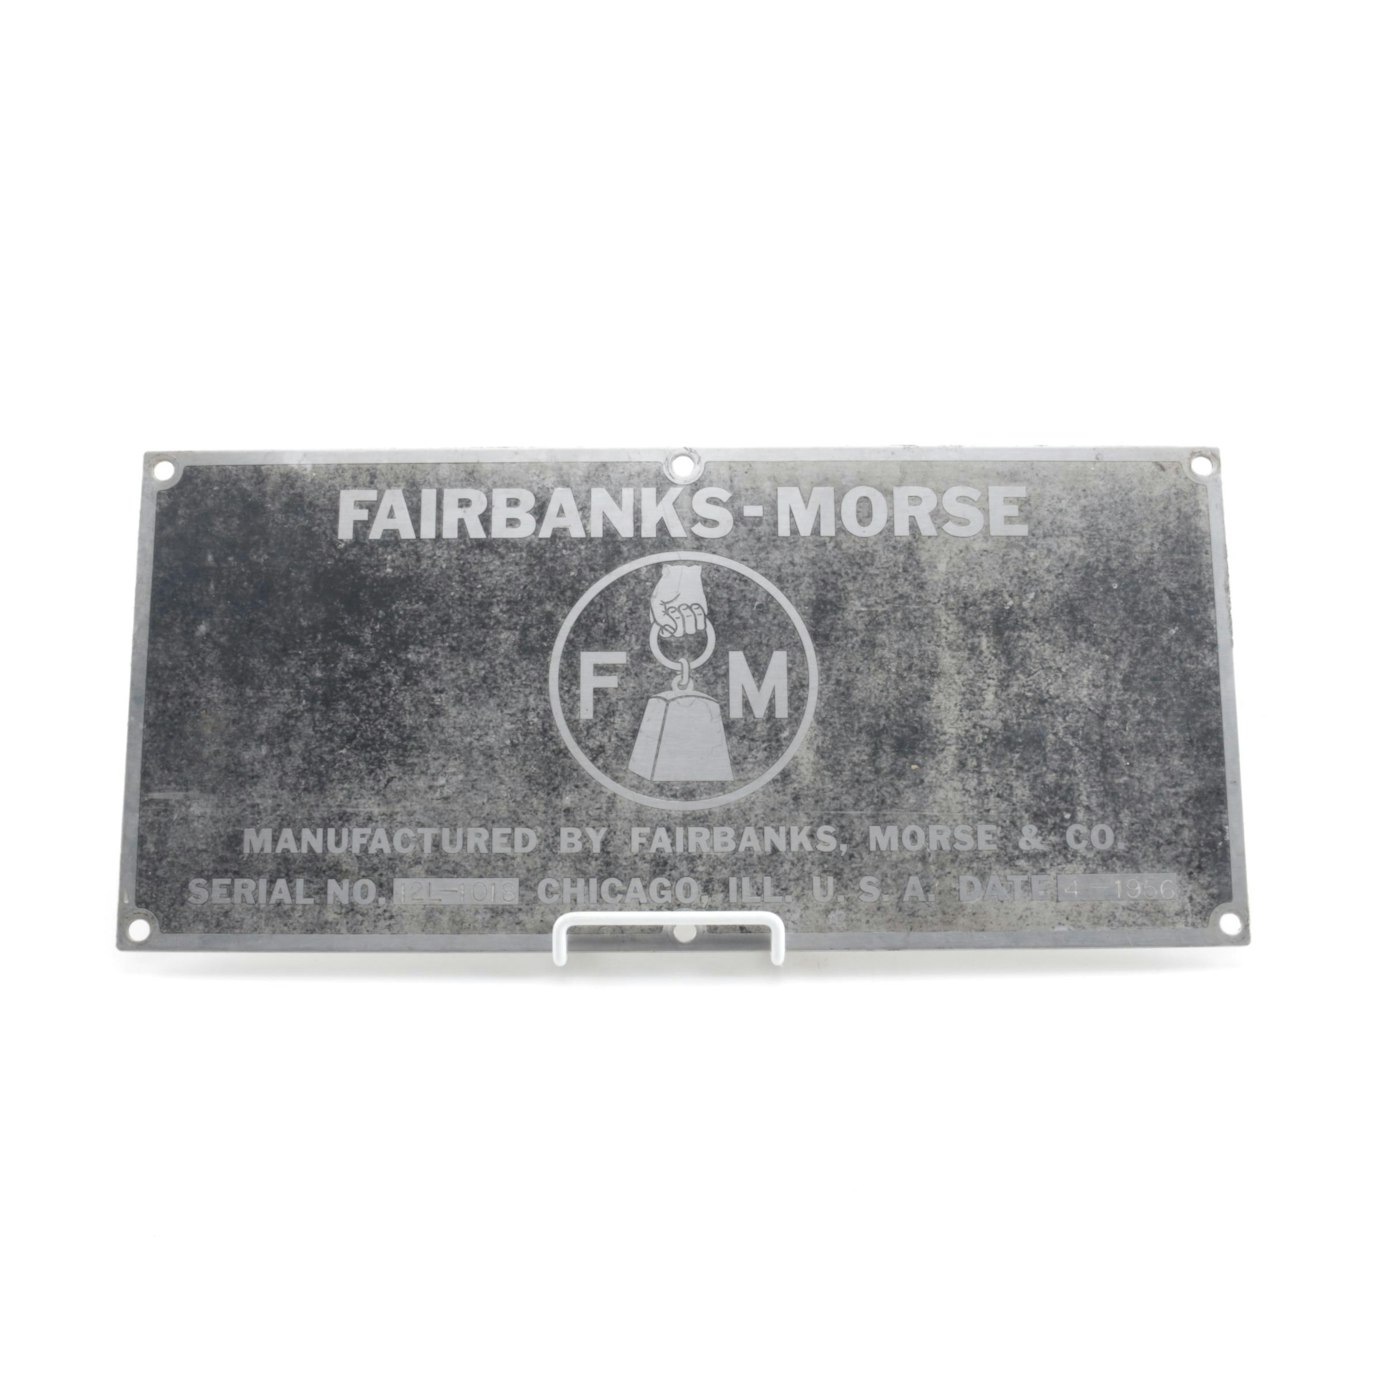 Fairbanks morse scale serial numbers chart